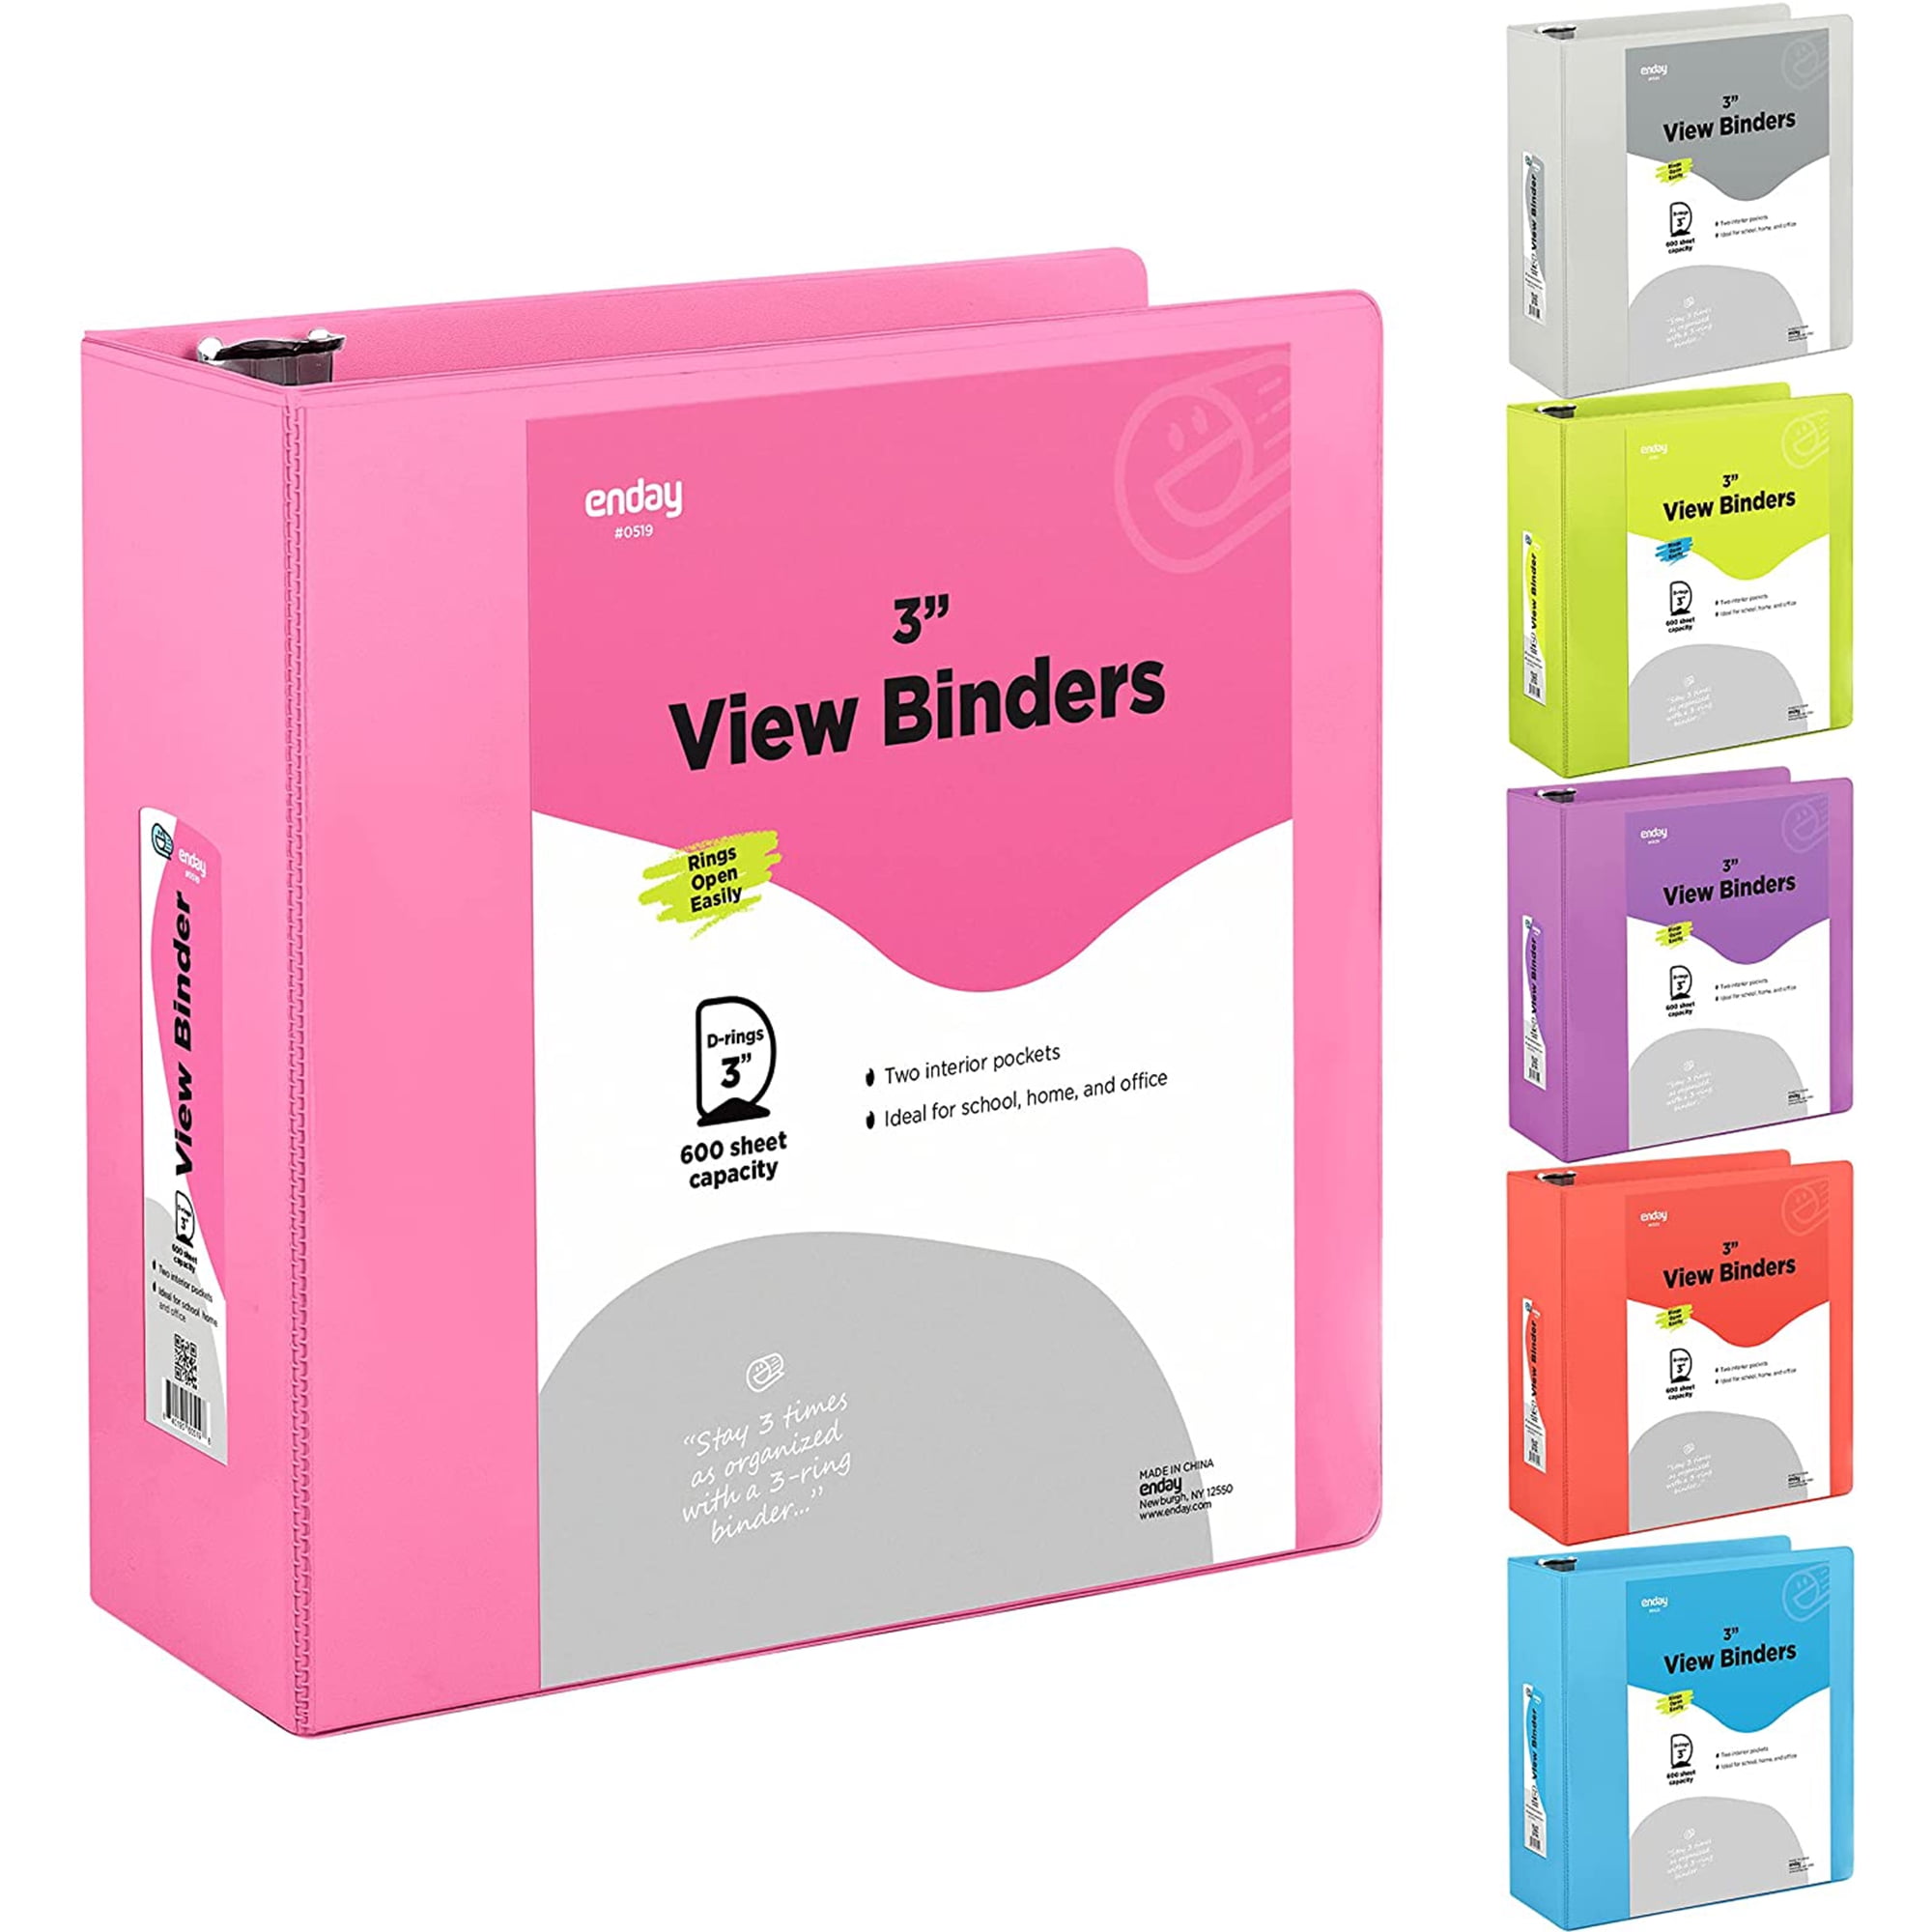 Enday 3 Inch Binder 3 Ring Binders with Pockets for Home Office School Supplies Organization Pink b4b72f79 3ac1 496f 8645 7542aea5f136.c9d33bbb511ee1b81419c3f8f1425253